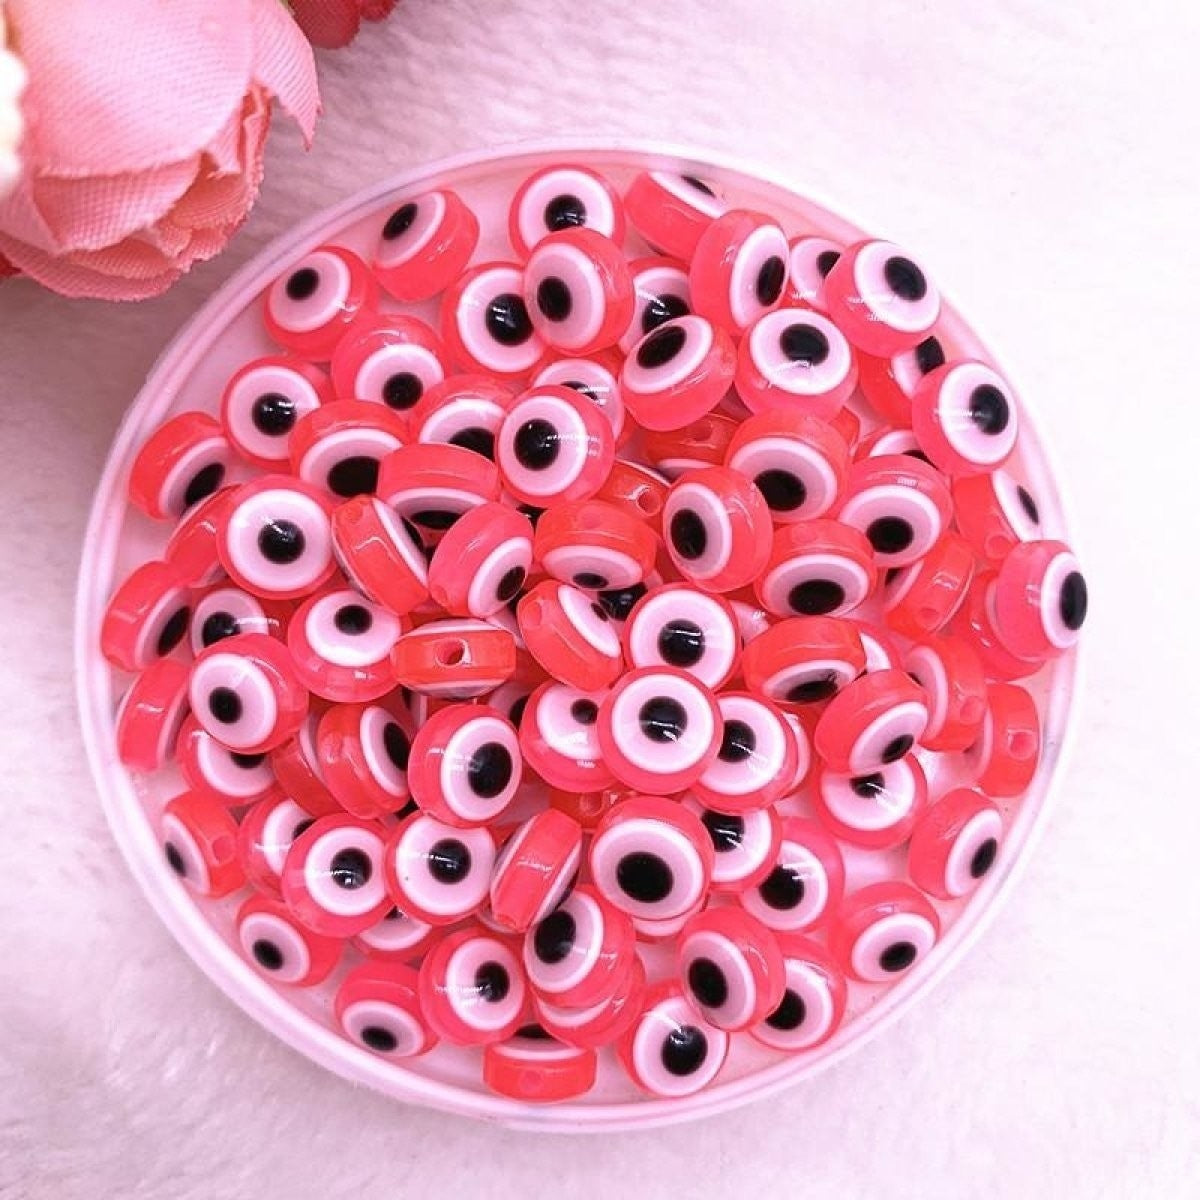 48Pcs 8/10Mm Oval Resin Spacer Beads Double Sided Eyes For Jewelry Making Diy Bracelet Deep Pink